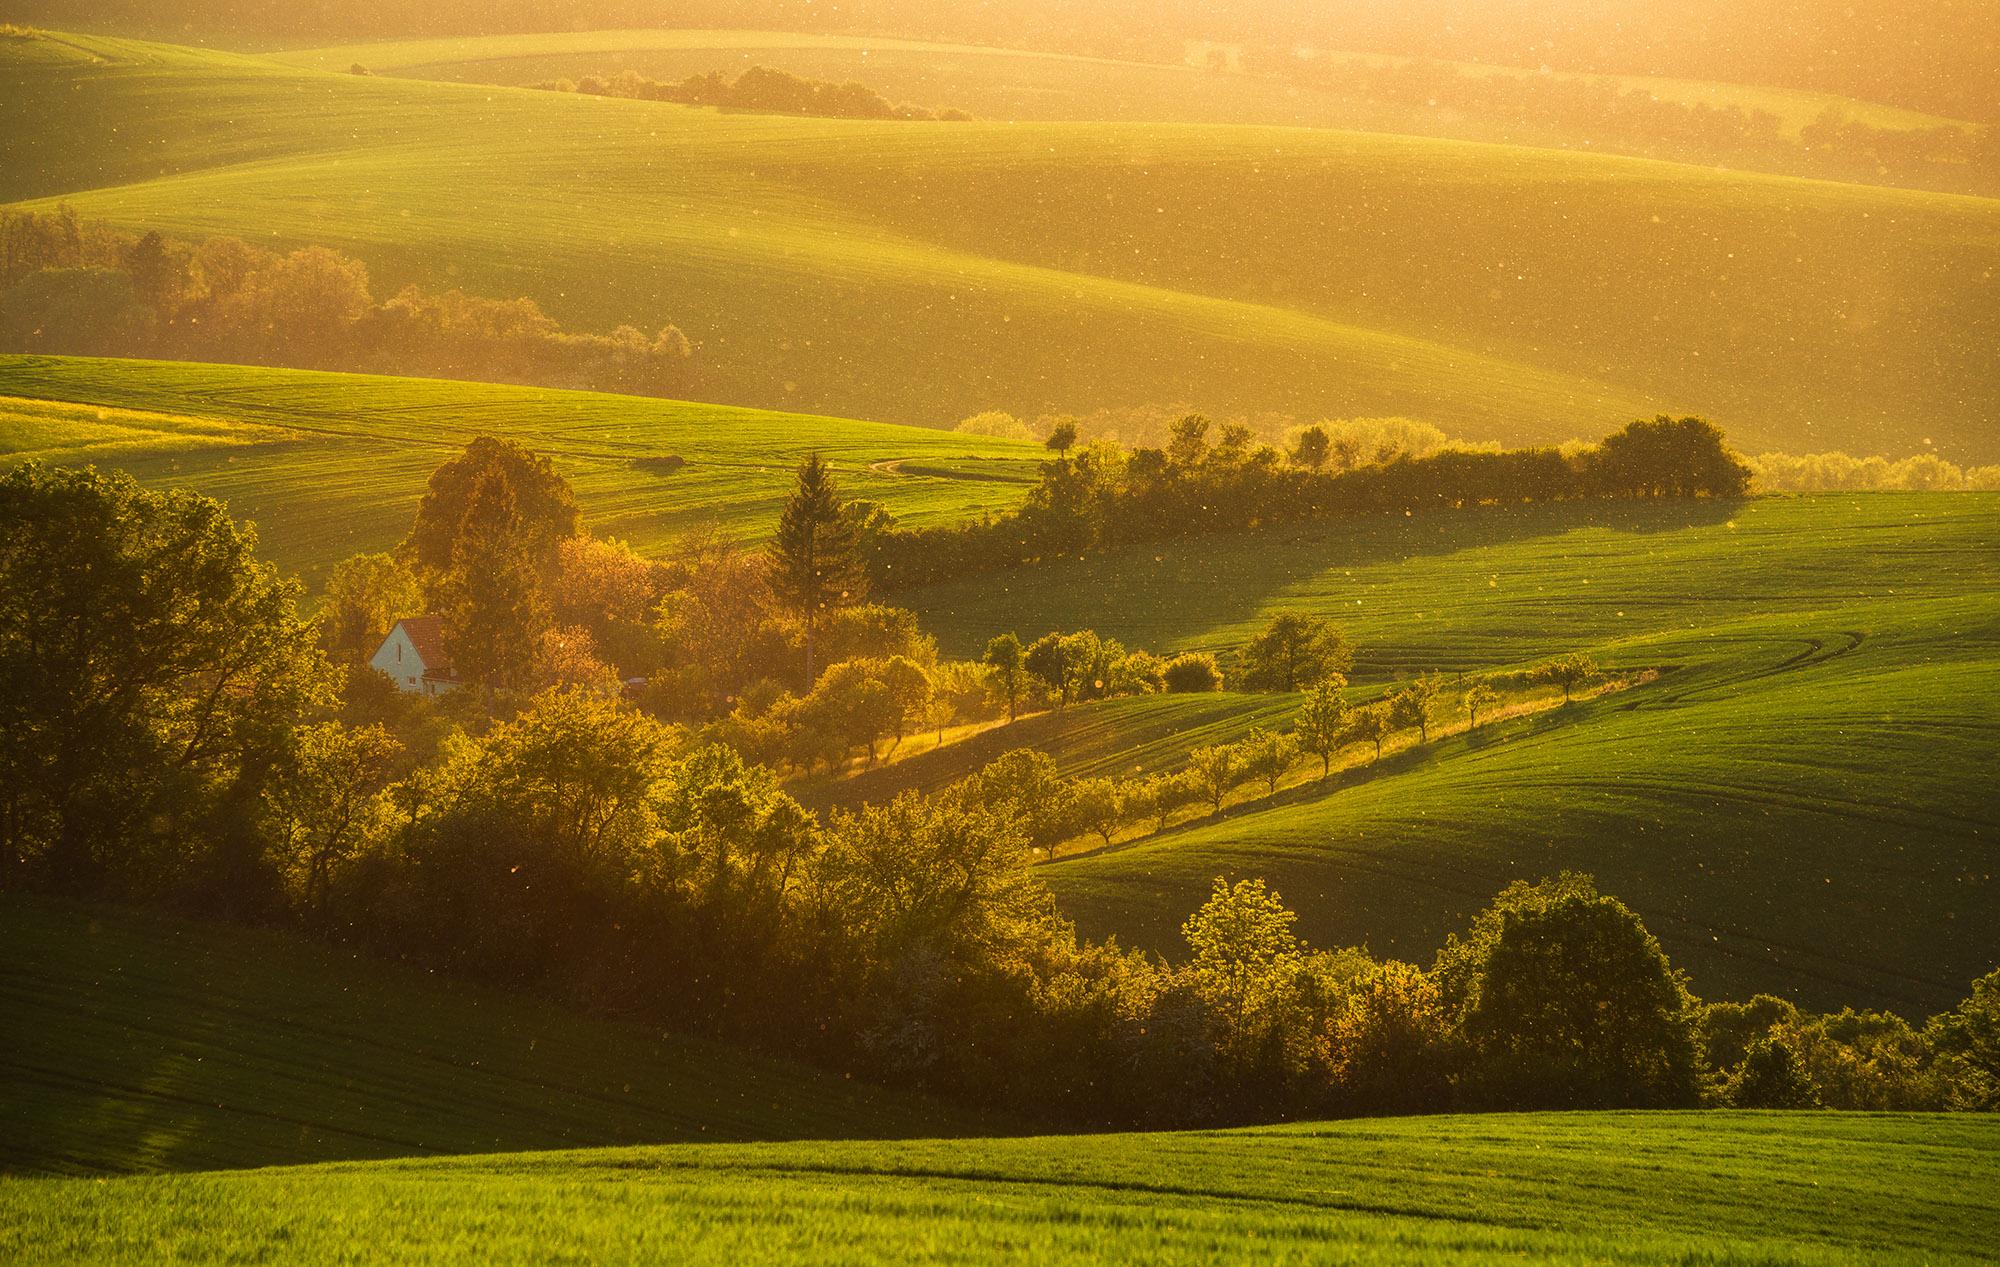 Magical sunset in South Moravia